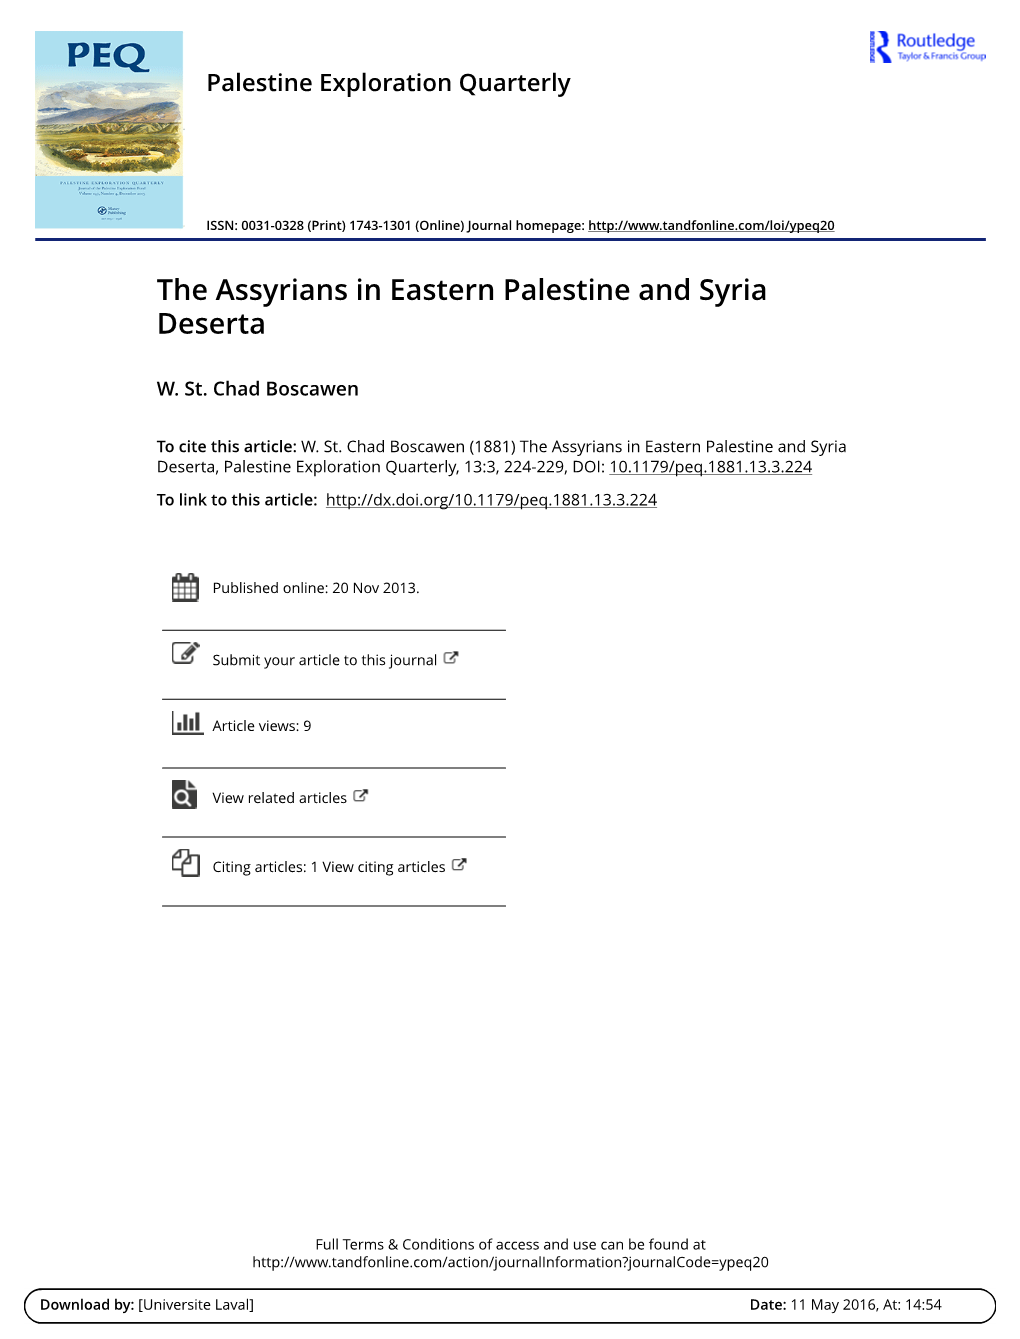 The Assyrians in Eastern Palestine and Syria Deserta